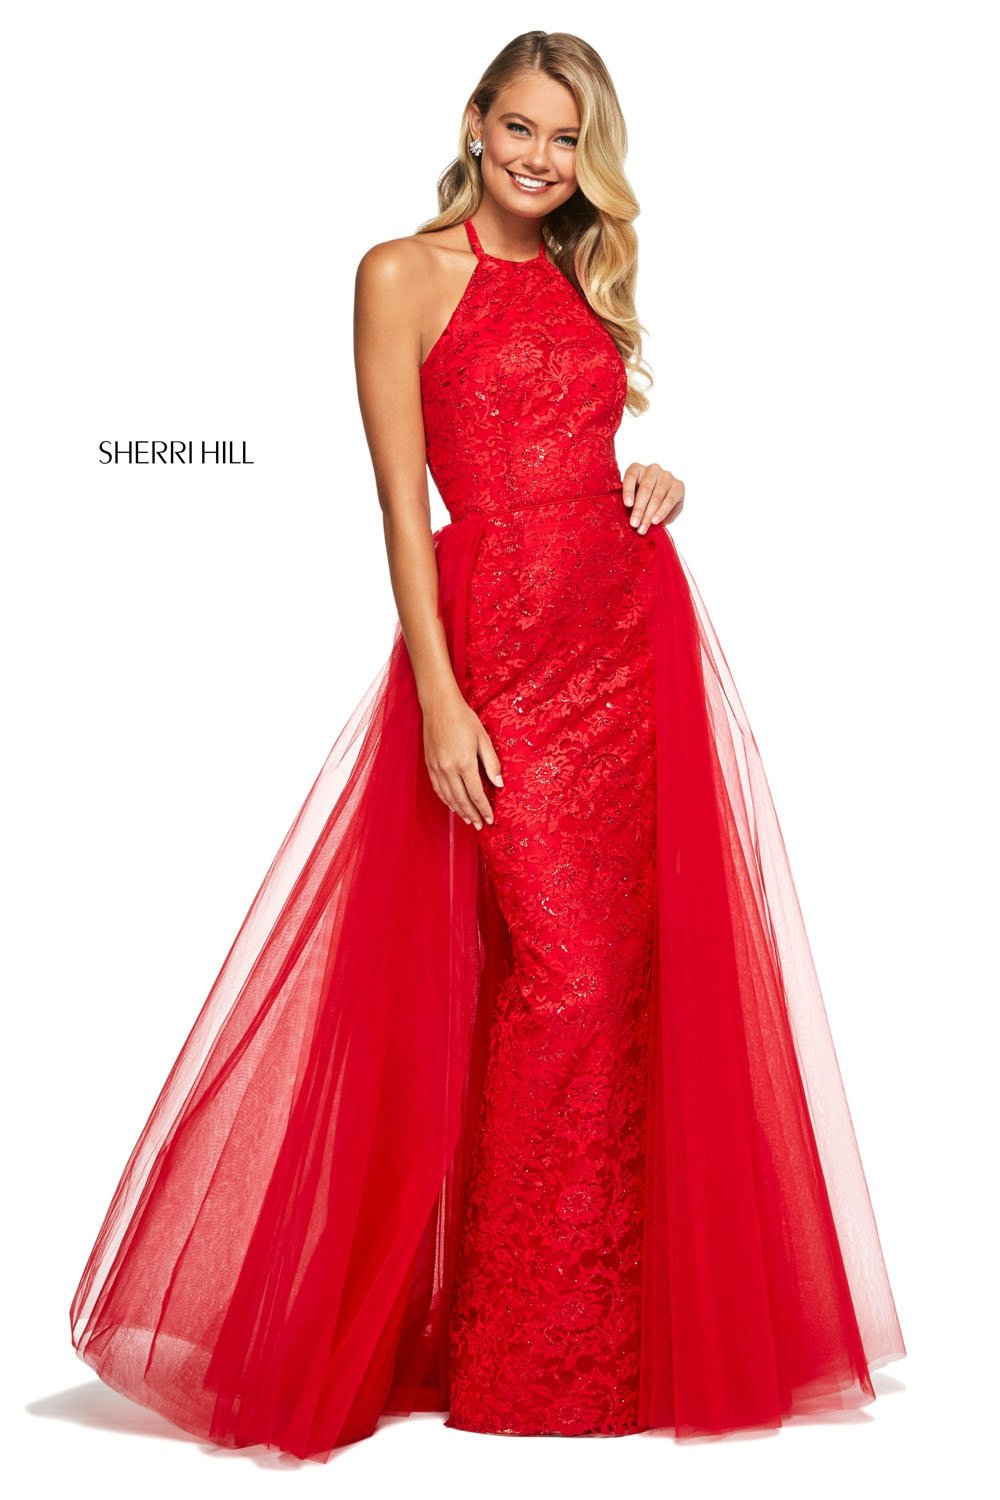 Sherri Hill 53207 dresses are available in the following colors: Black, Blush, Aqua, Ivory, Red. $450 is the  best price guarantee